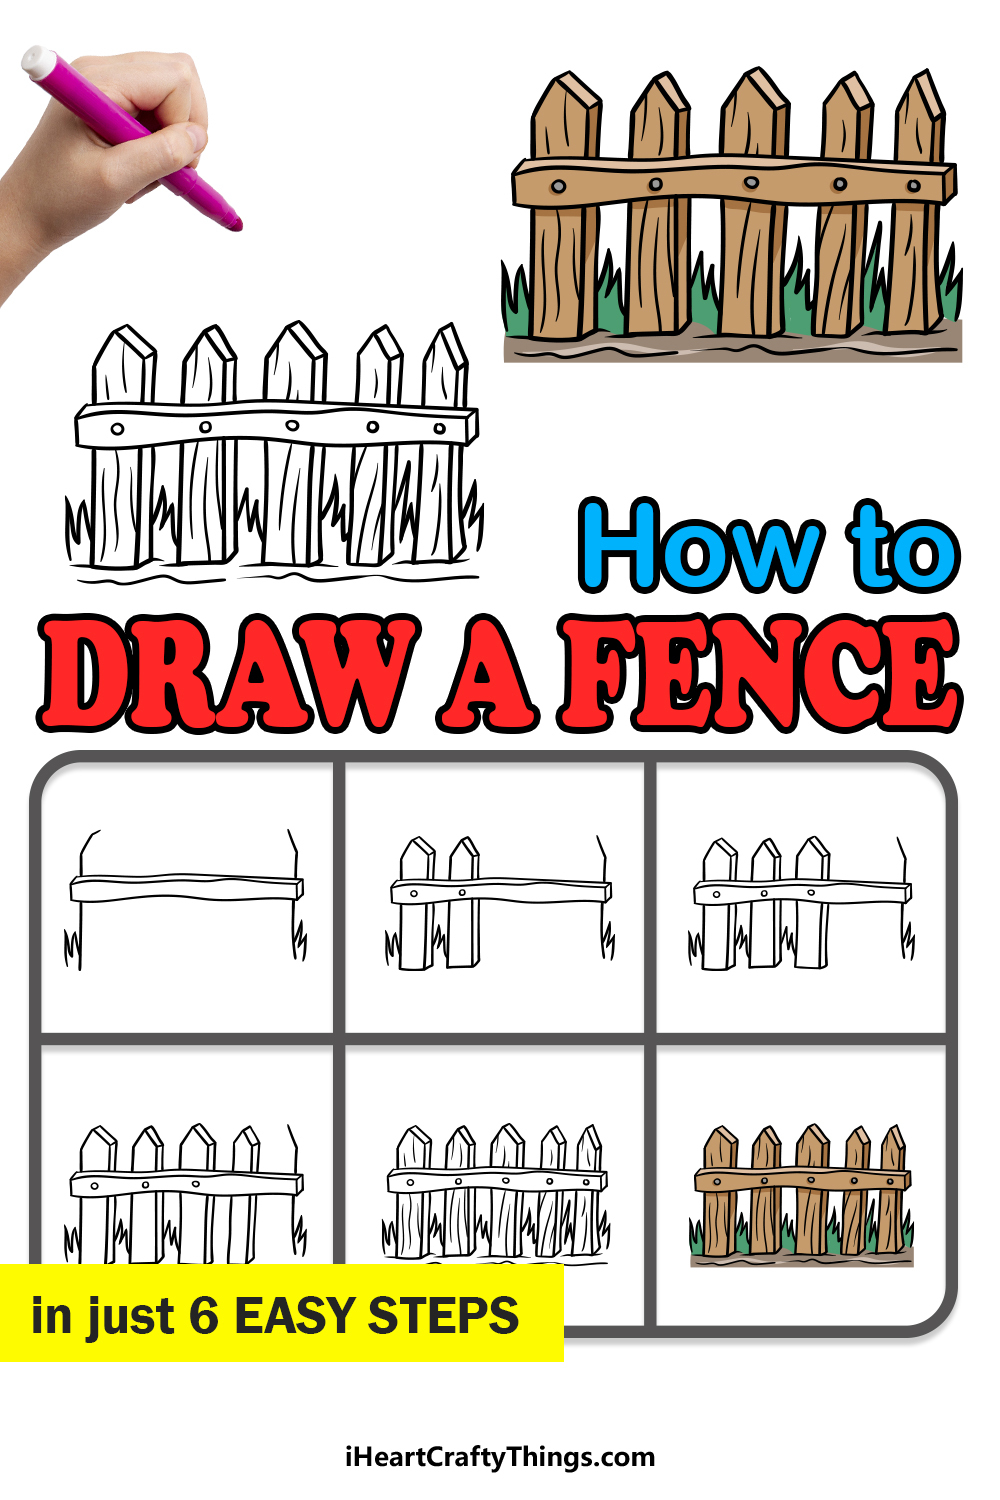 how to draw a fence in 6 easy steps